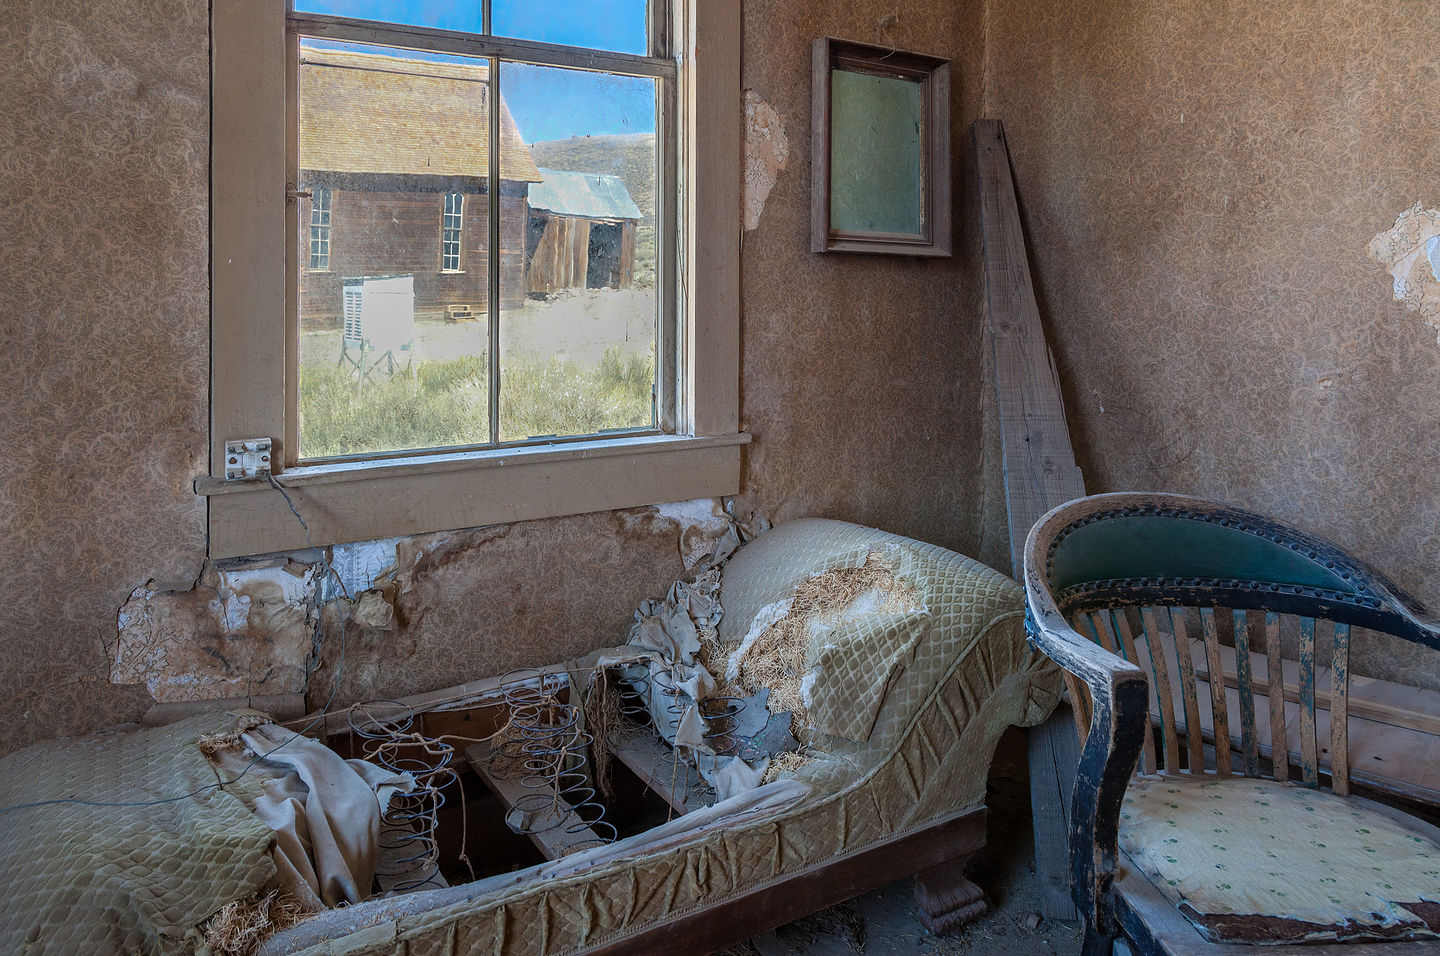 Bodie Interior Couch with Window View